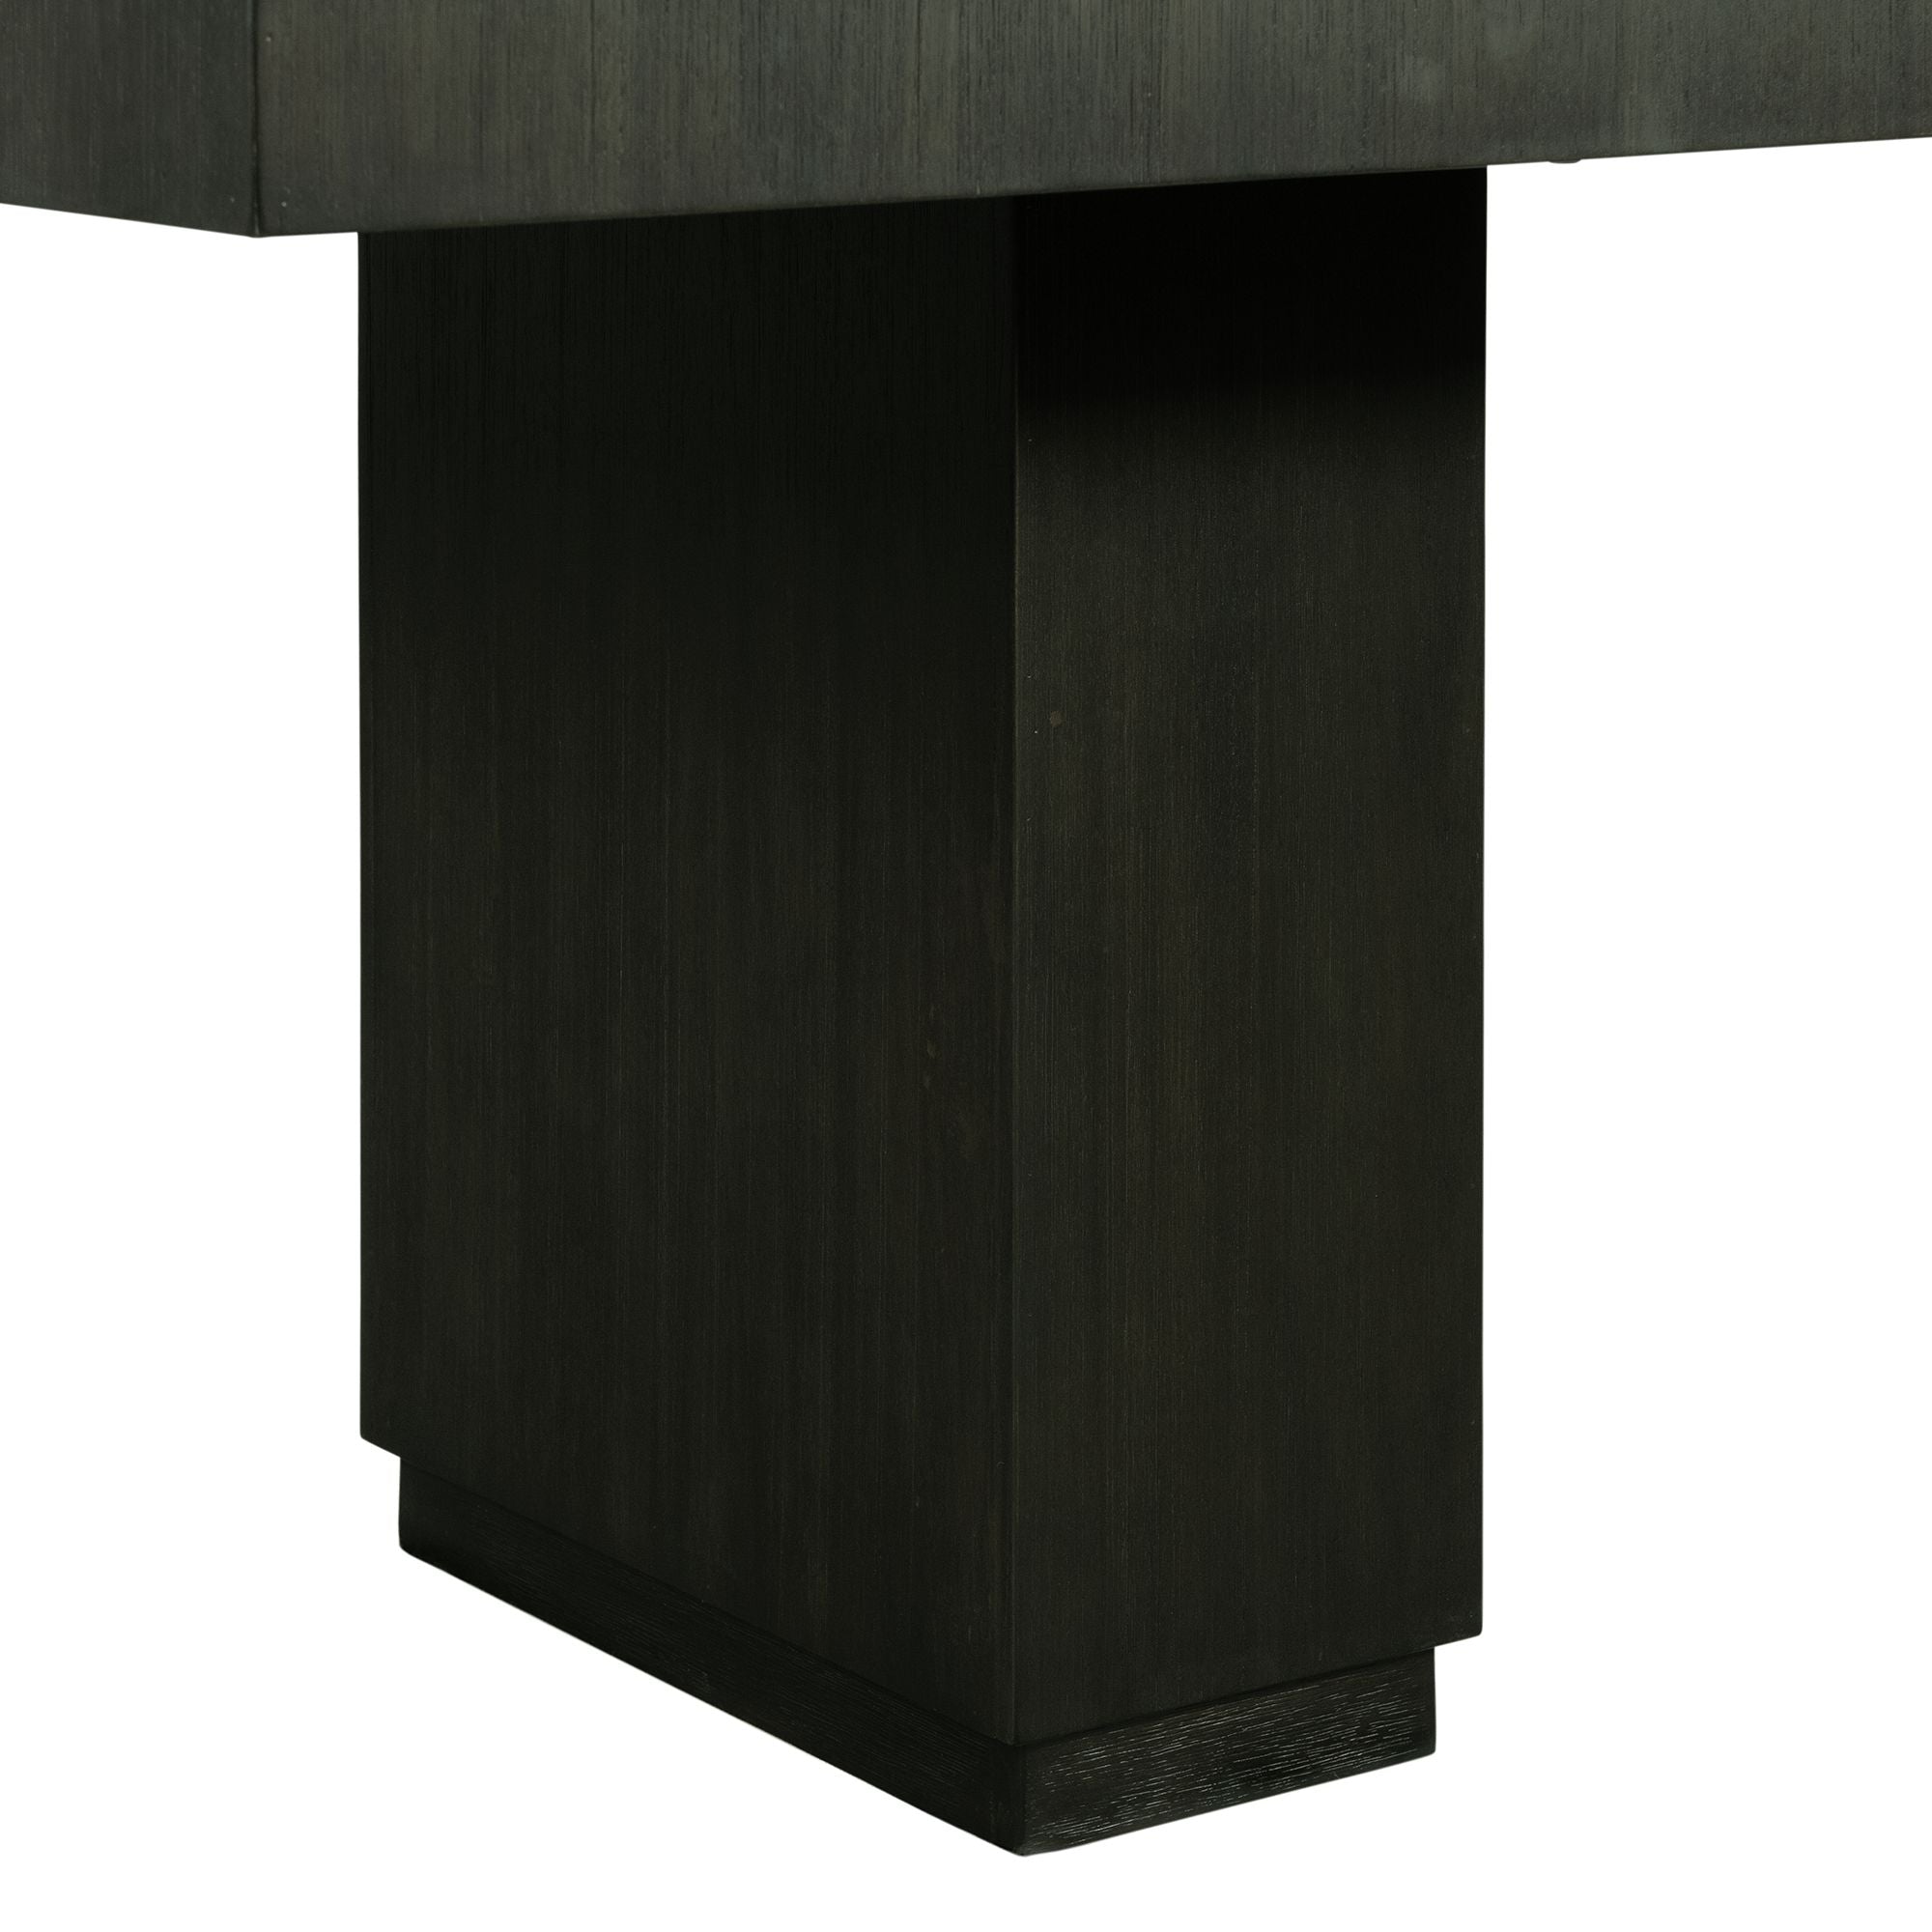 Donovan Extendable Dining Table